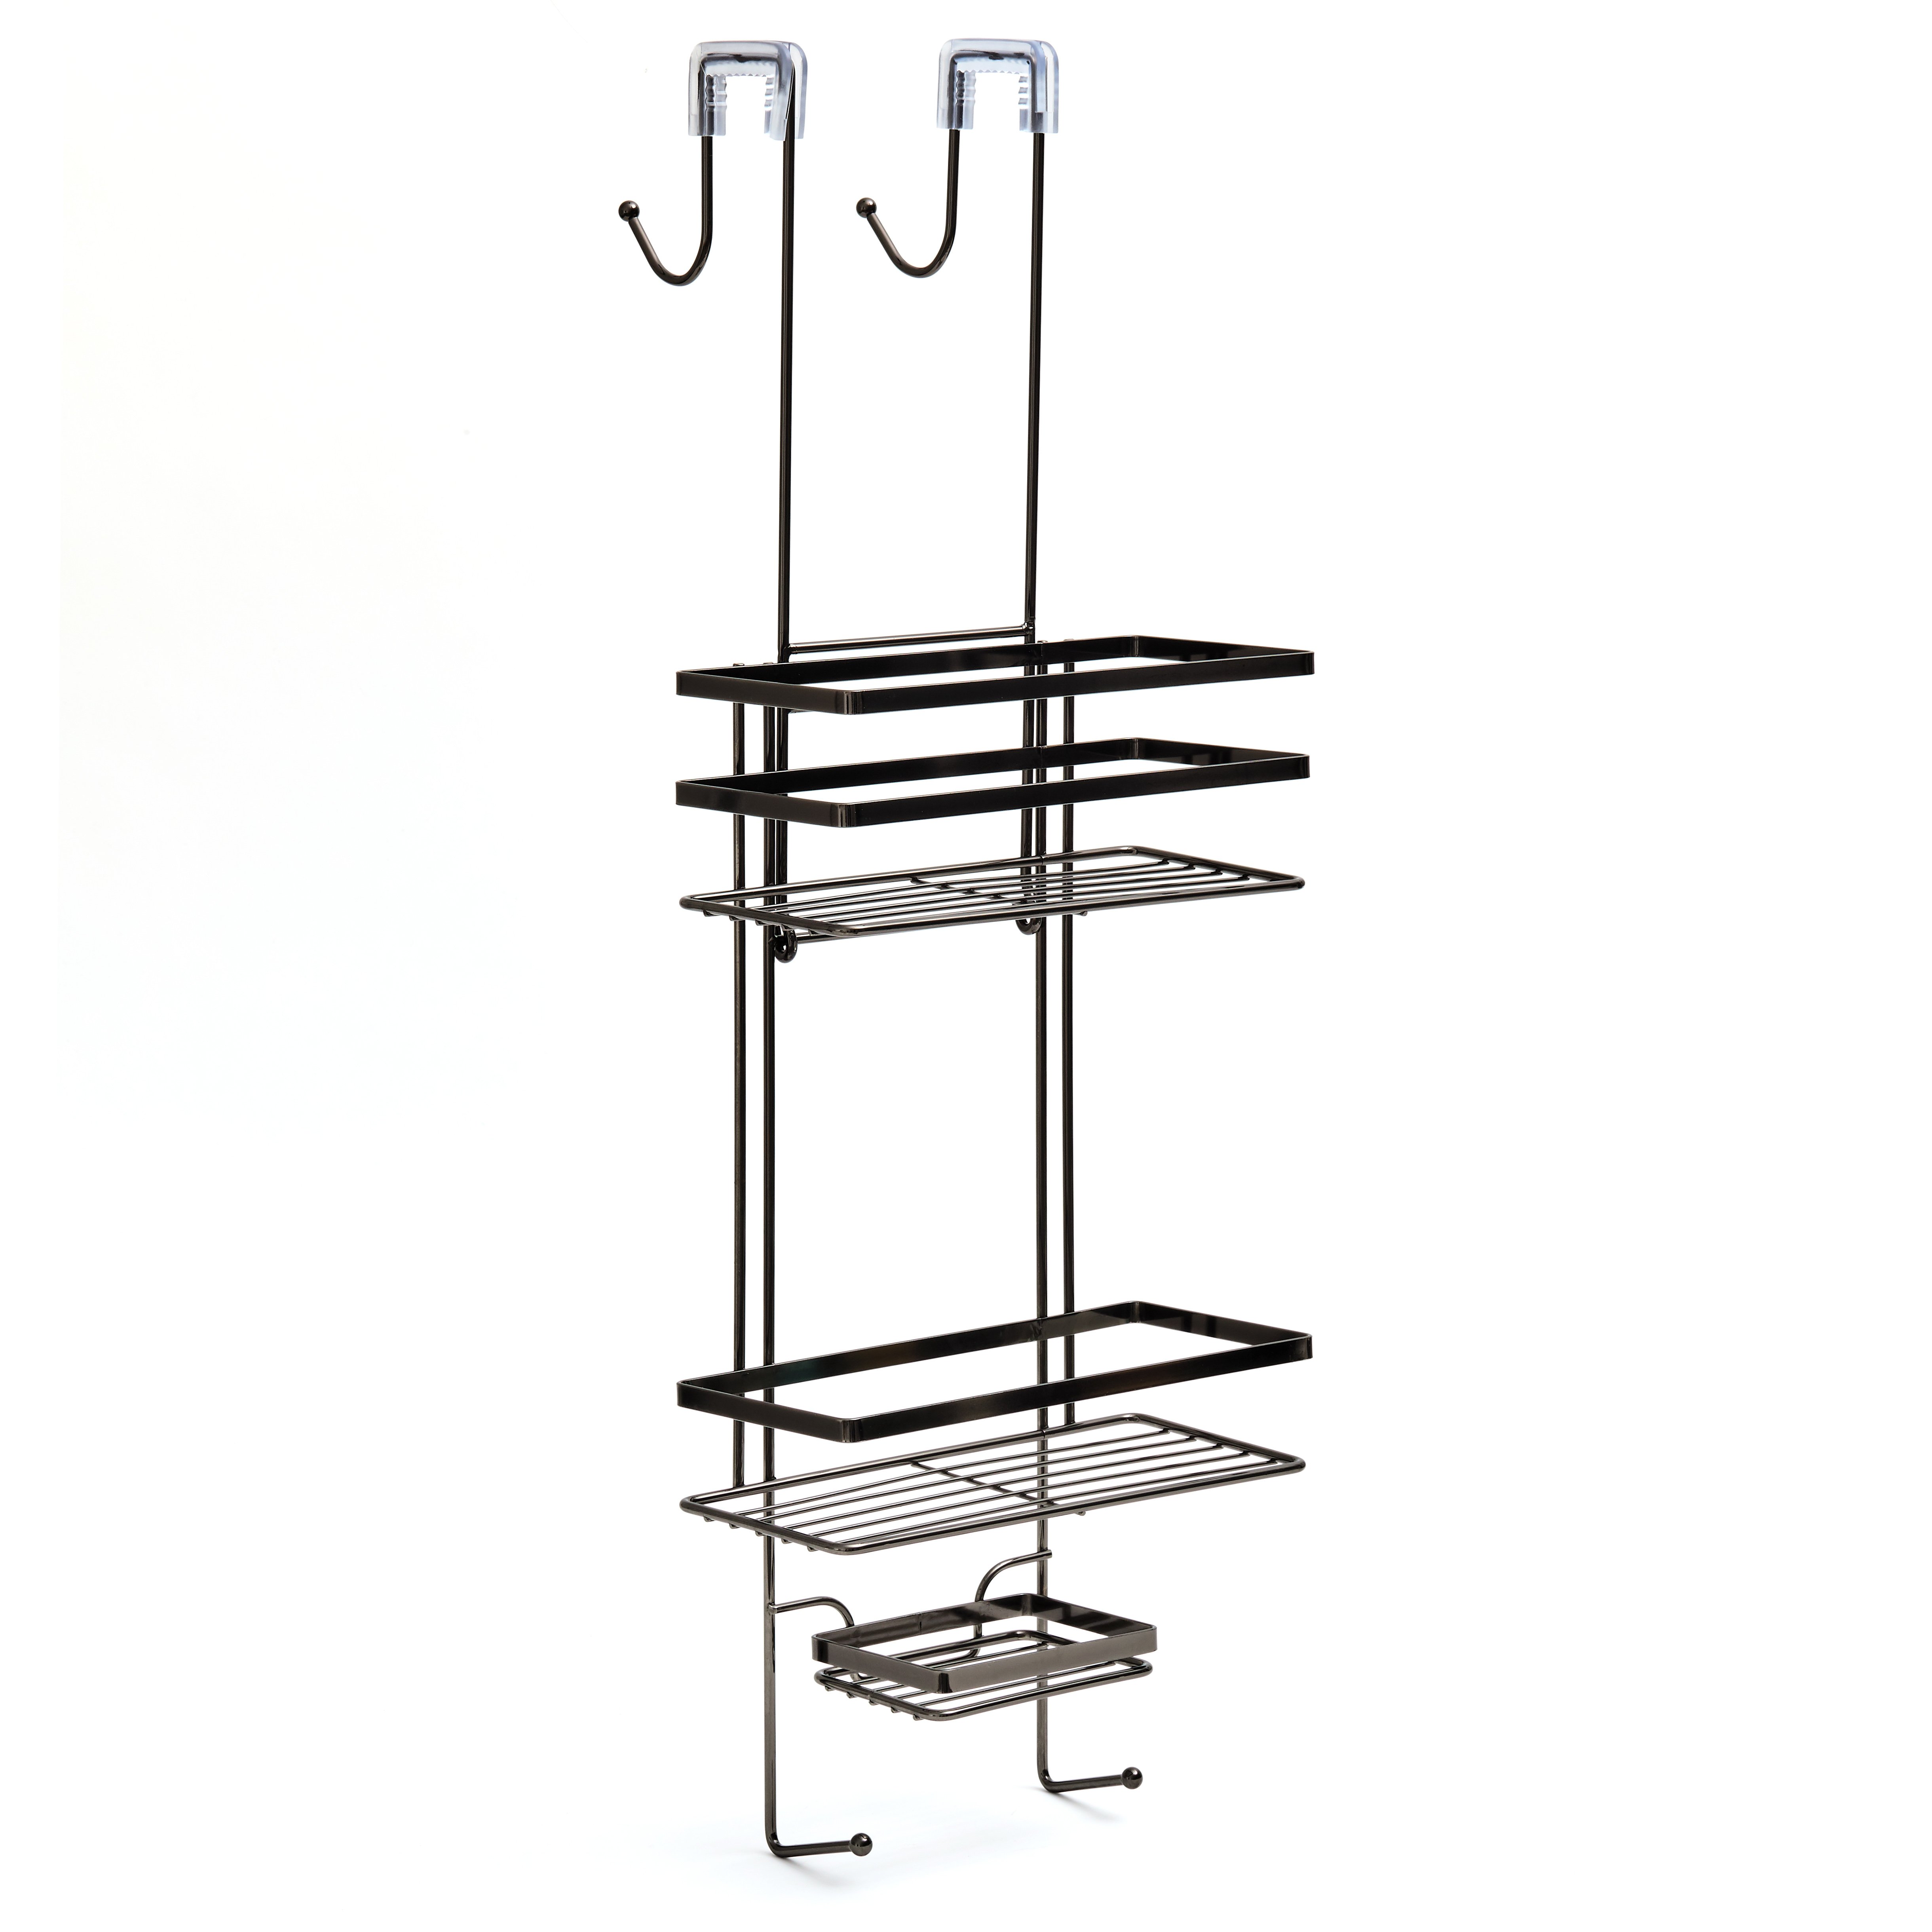 L.T. Williams Over Screen Shower Caddy - White